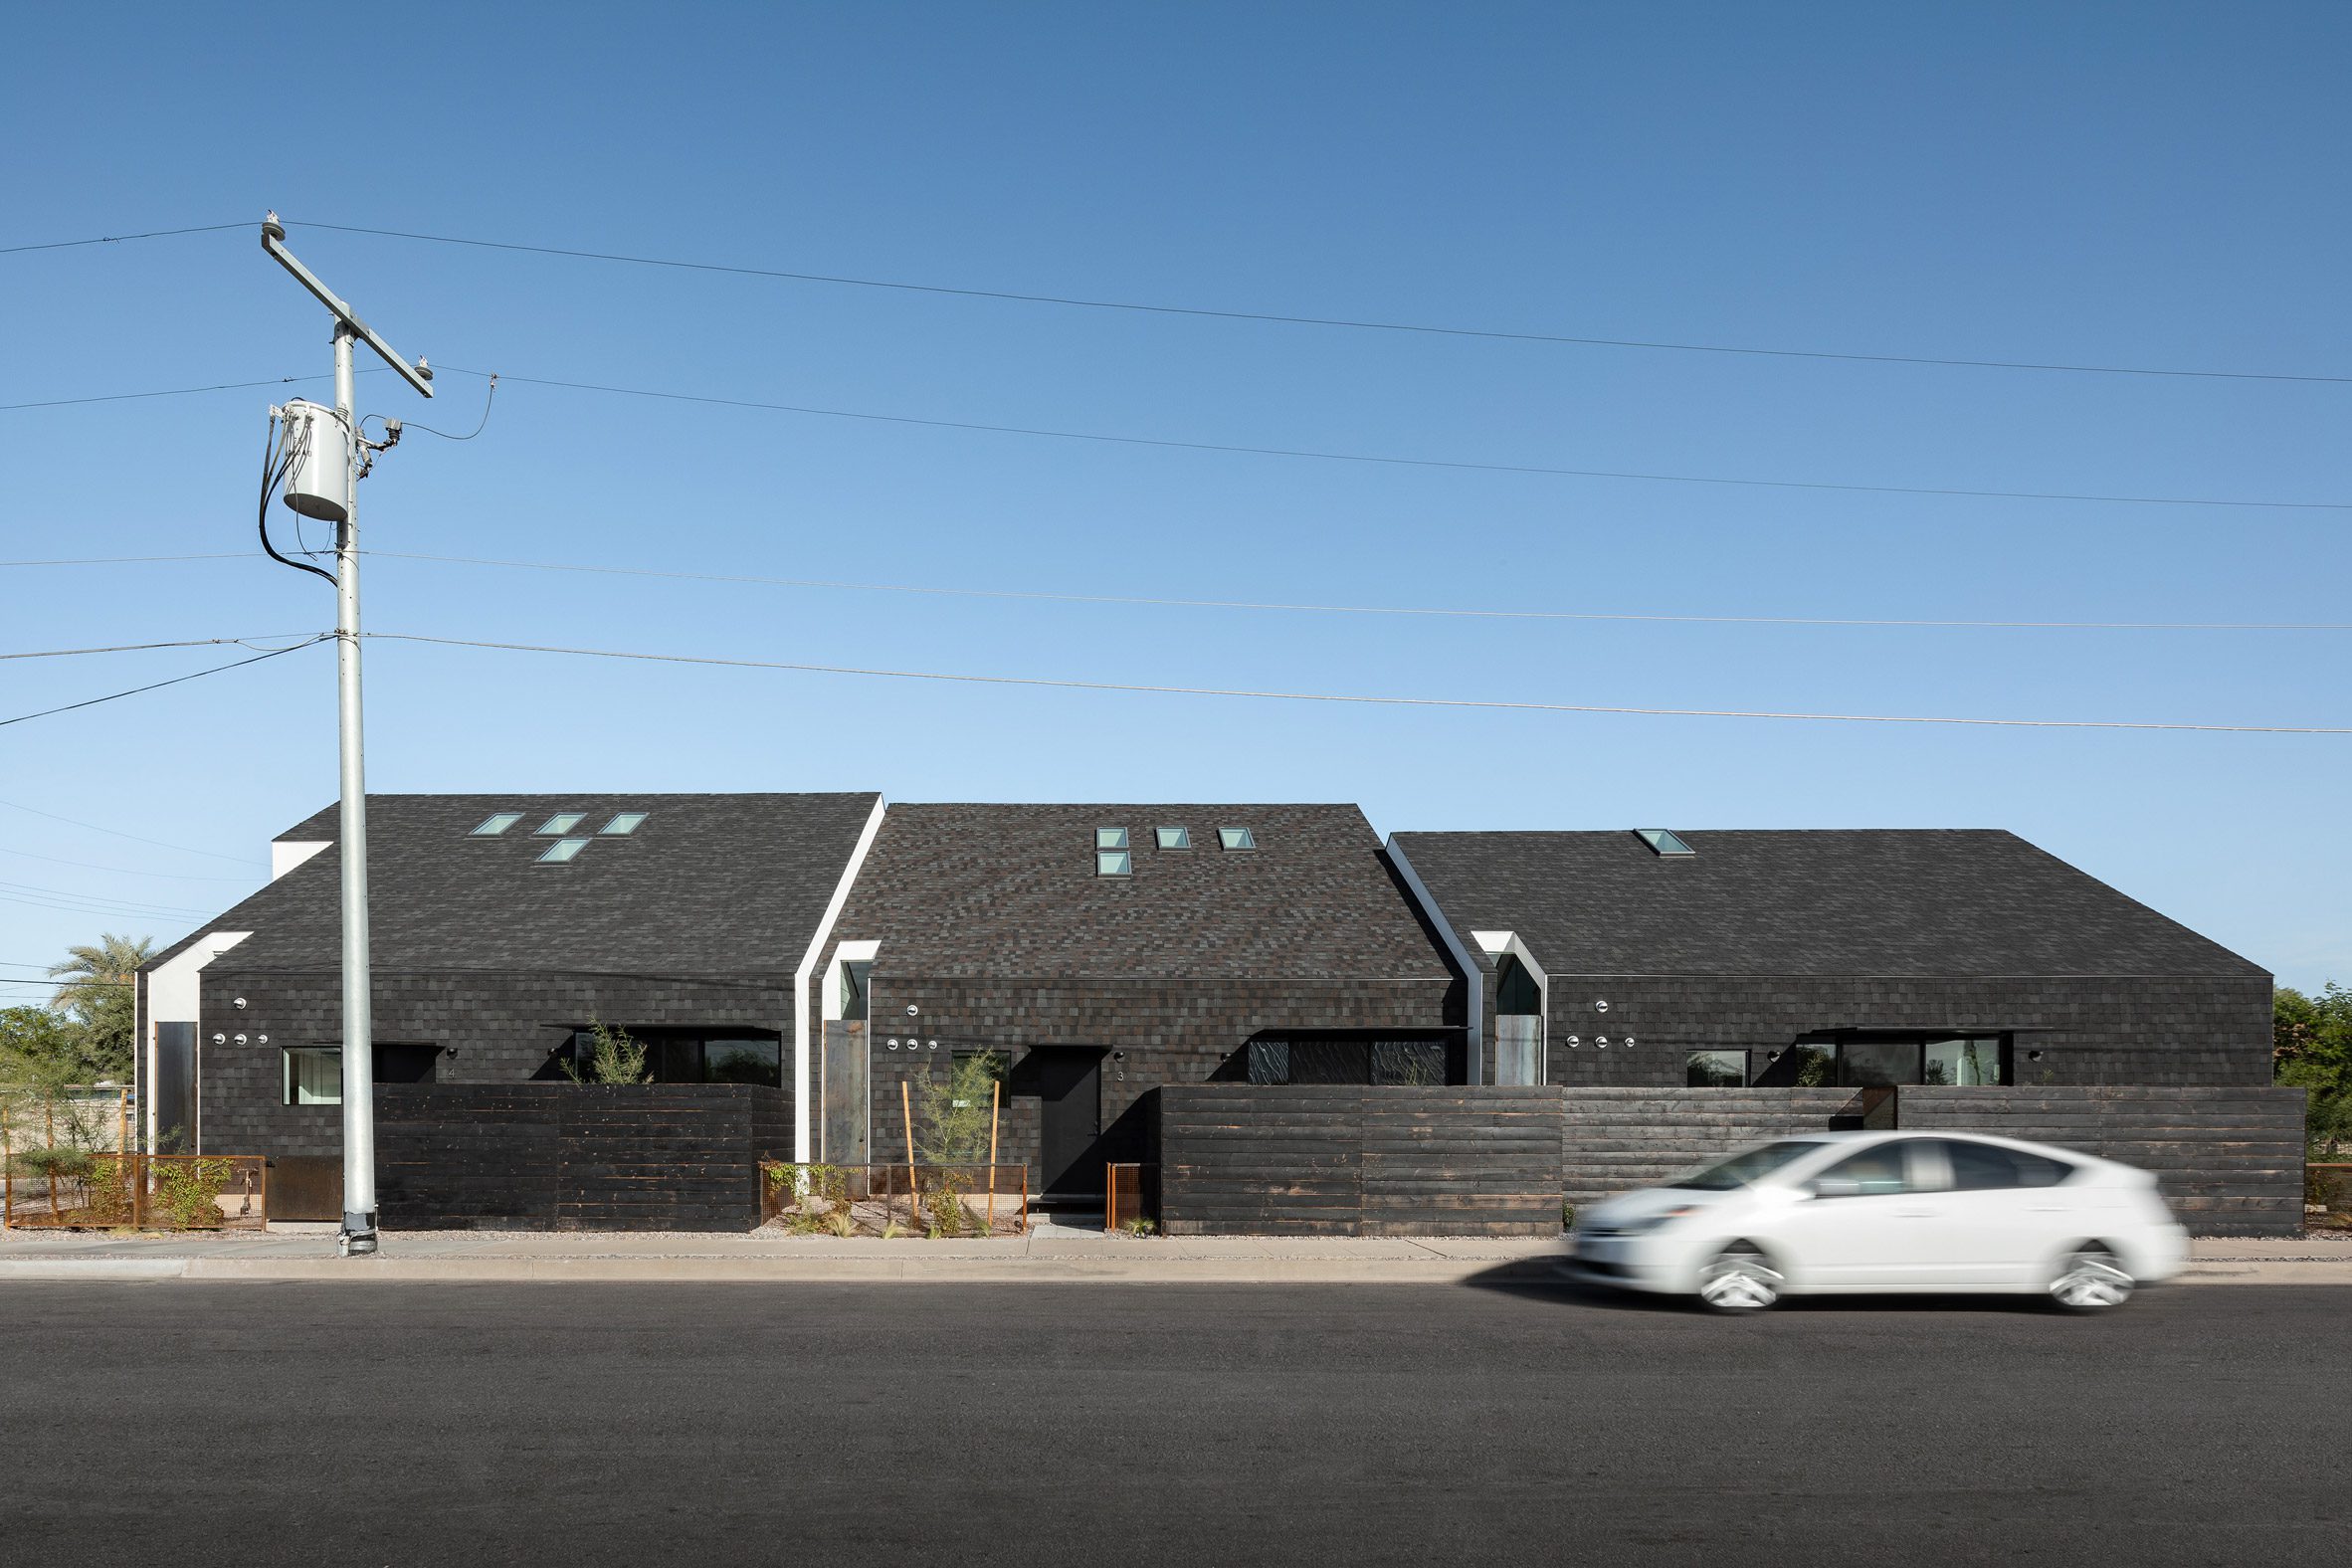 House with a pitched roof clad in asphalt shingles by SinHei Kwok